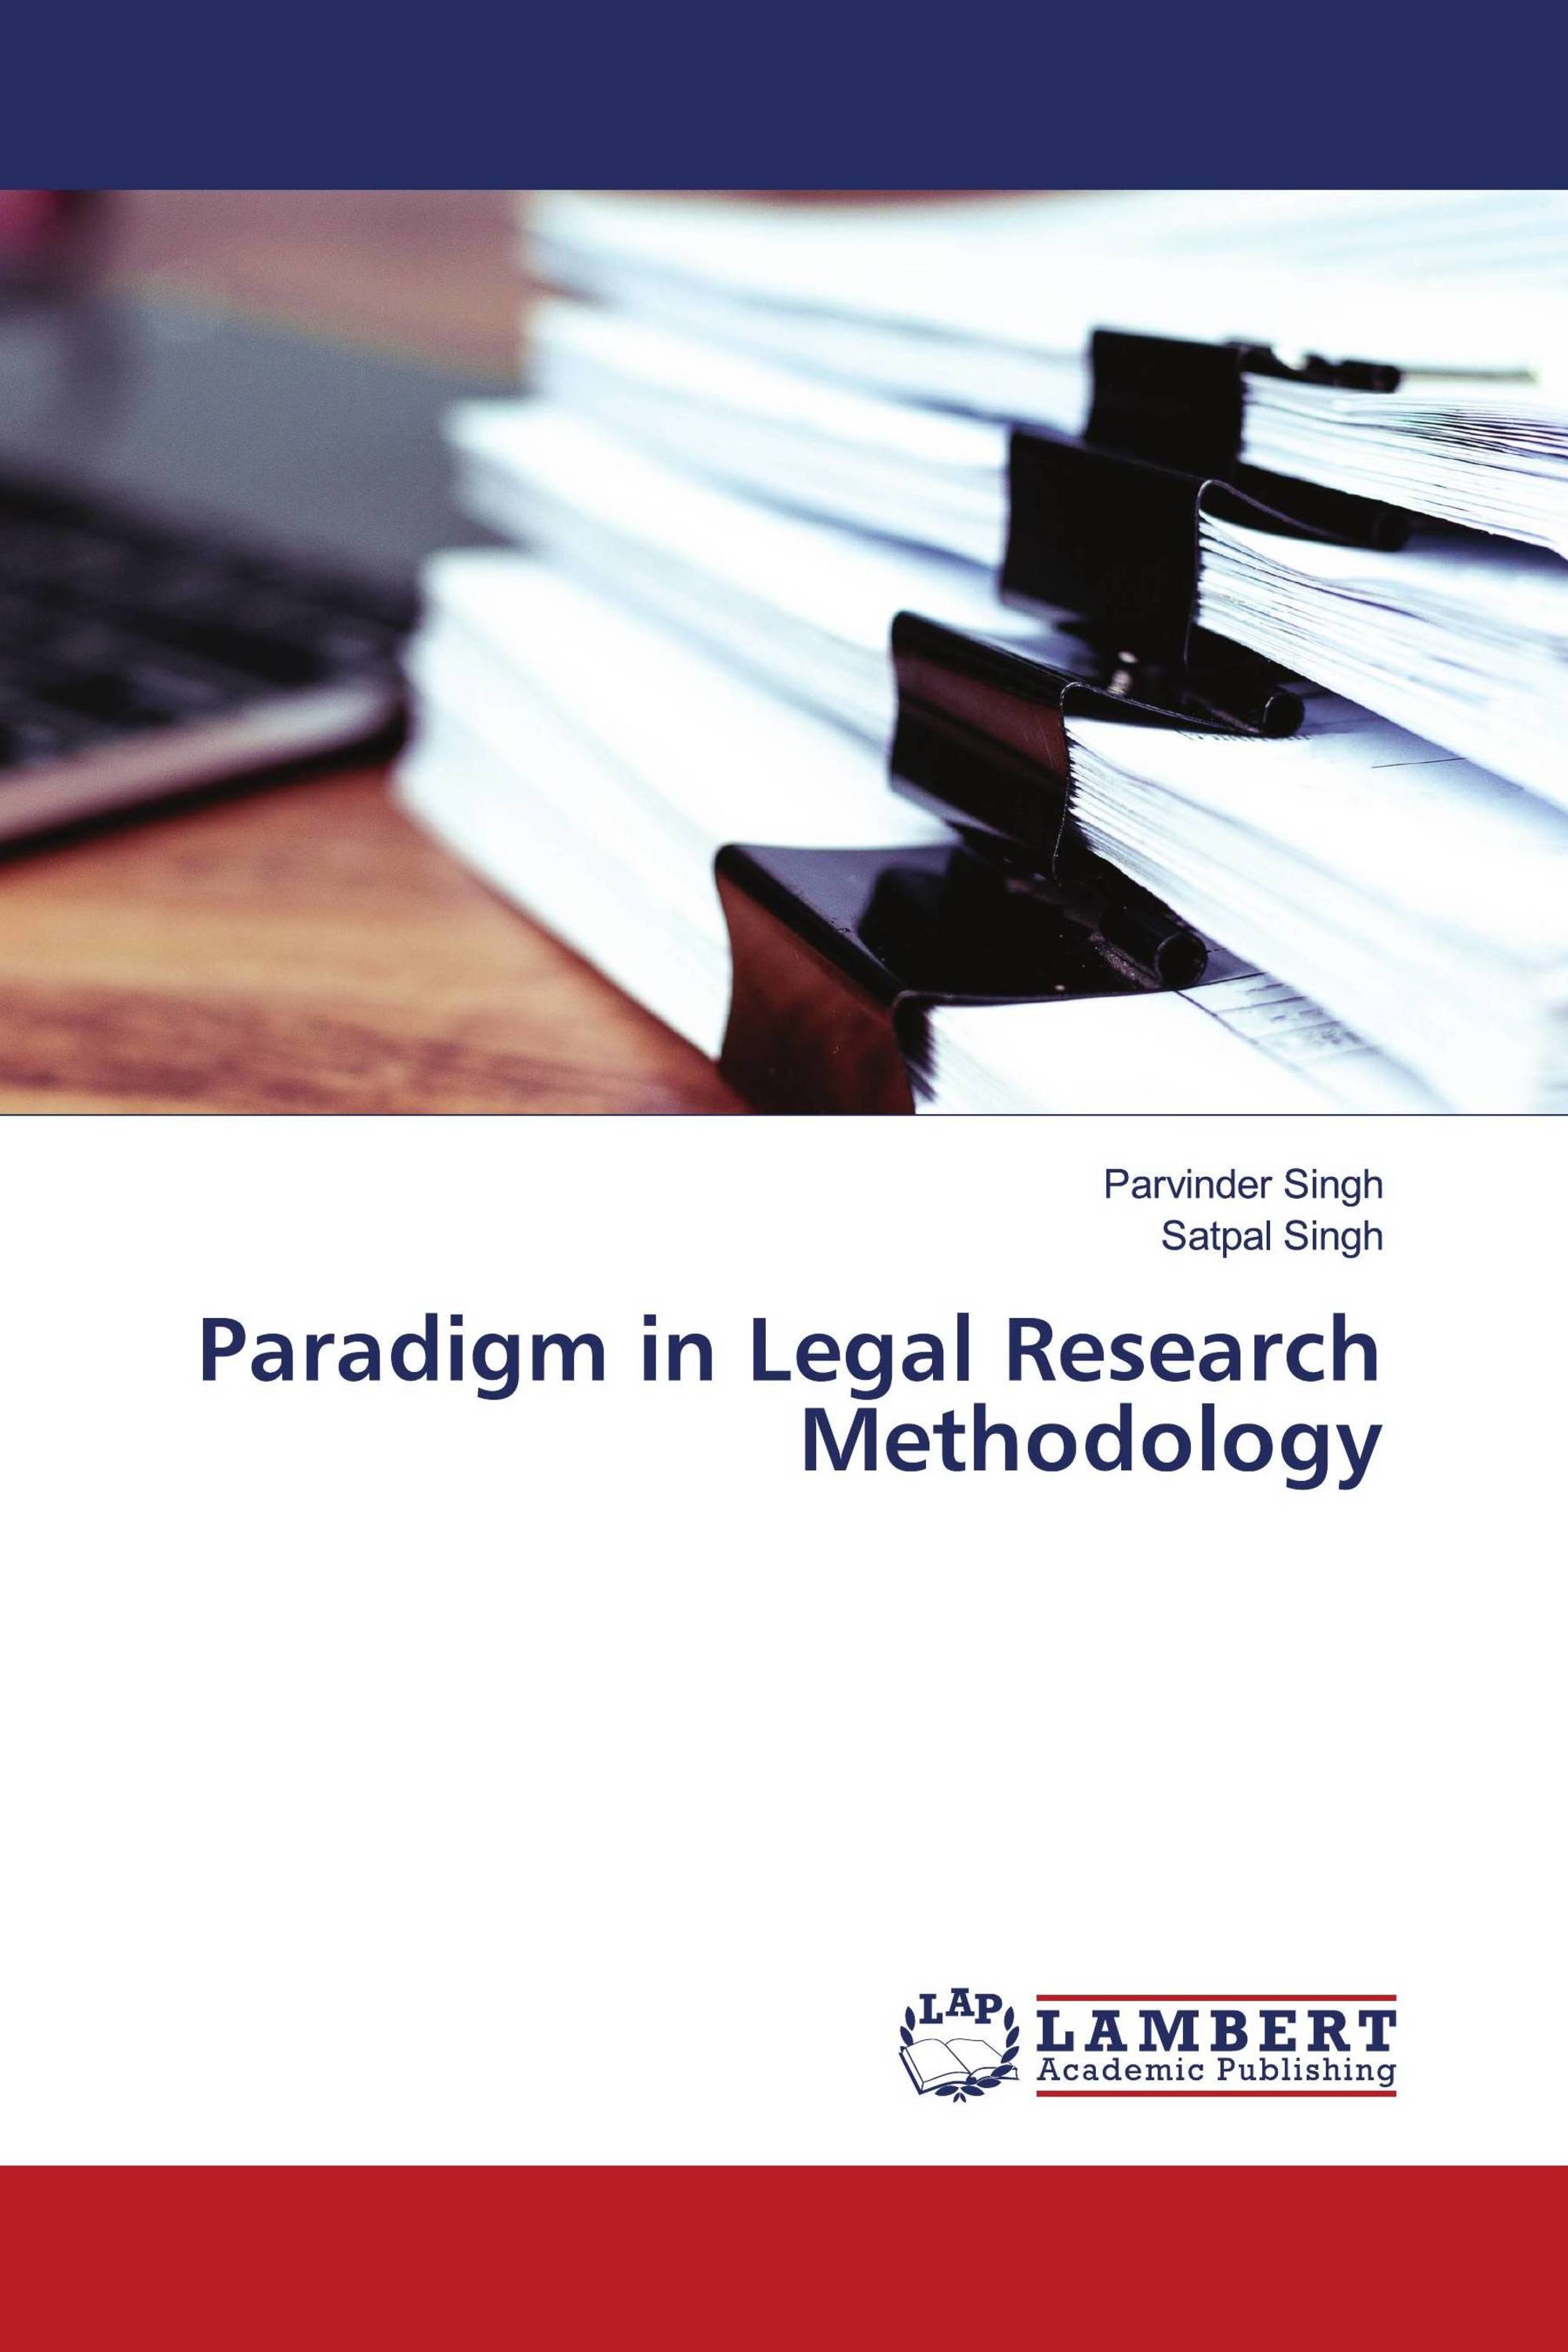 question paper on legal research methodology